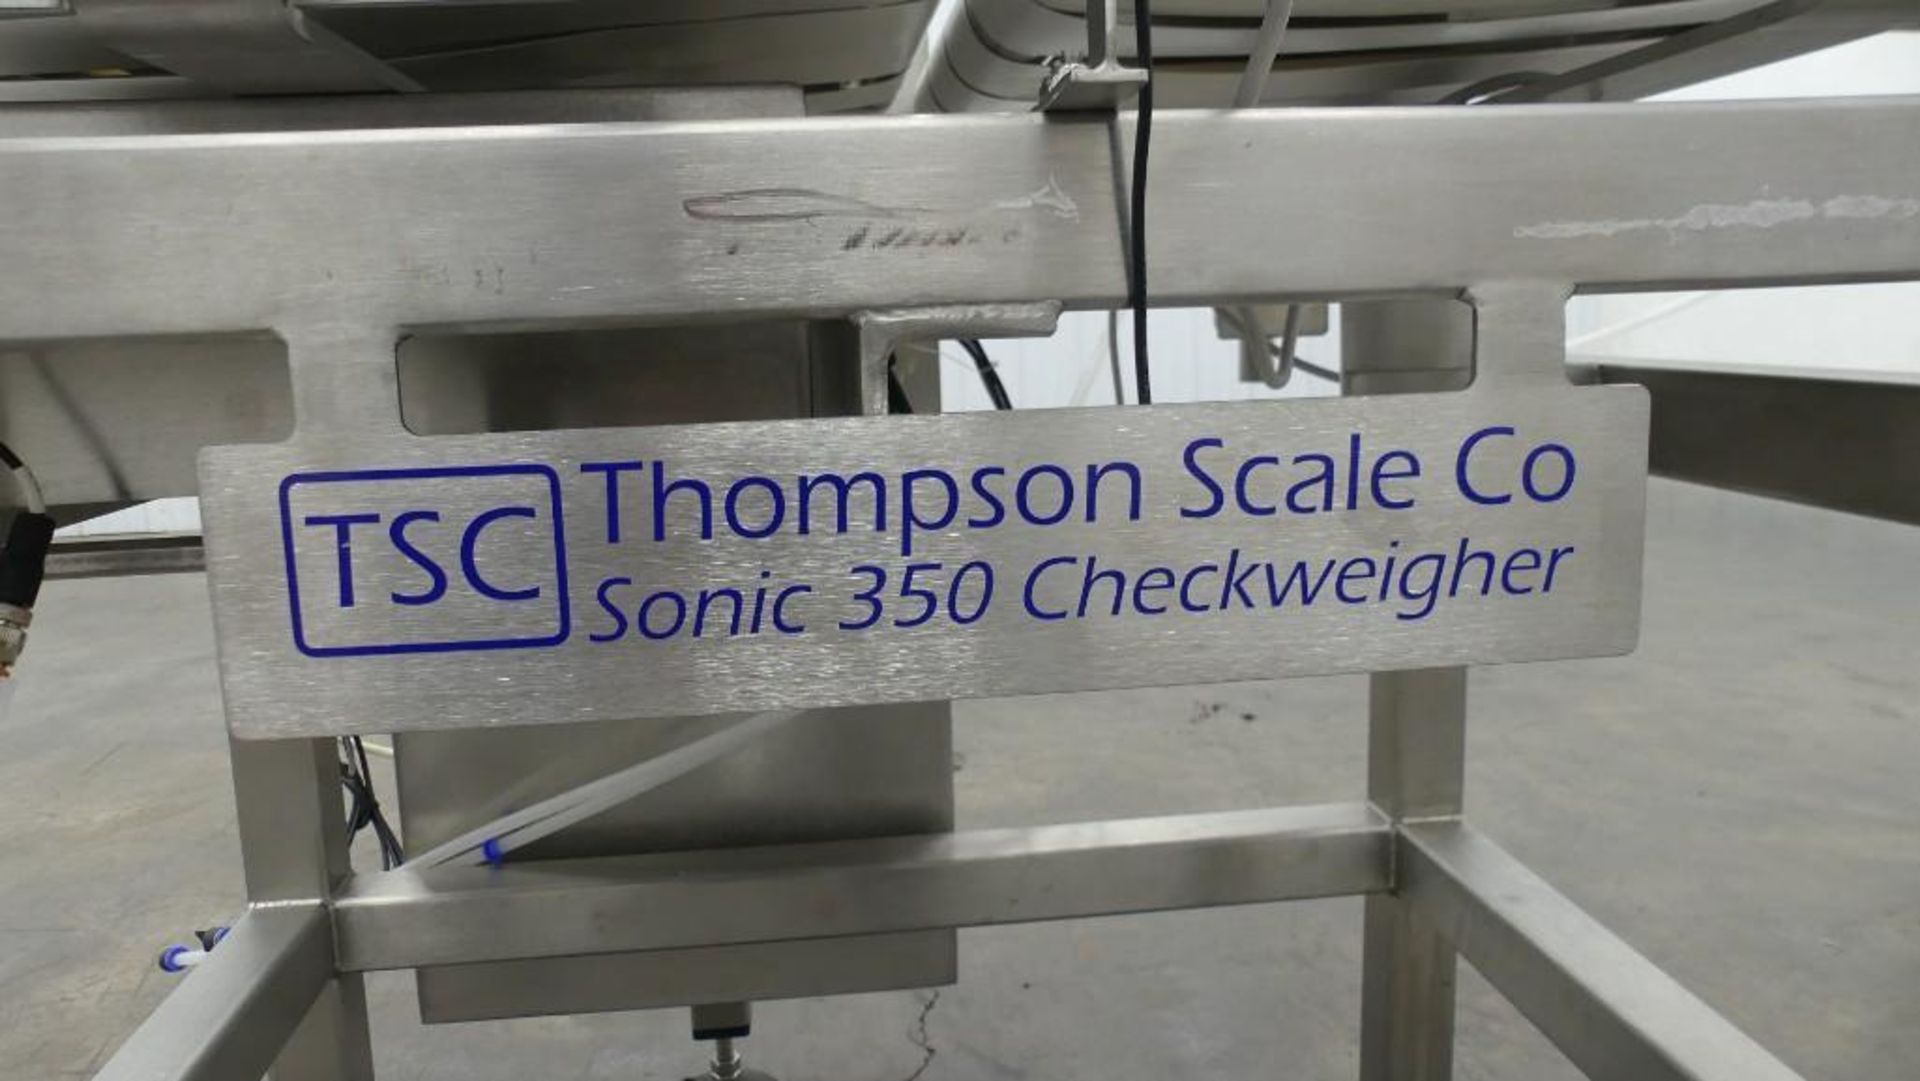 Thompson Scale Co Sonic 350 Checkweigher - Image 10 of 18